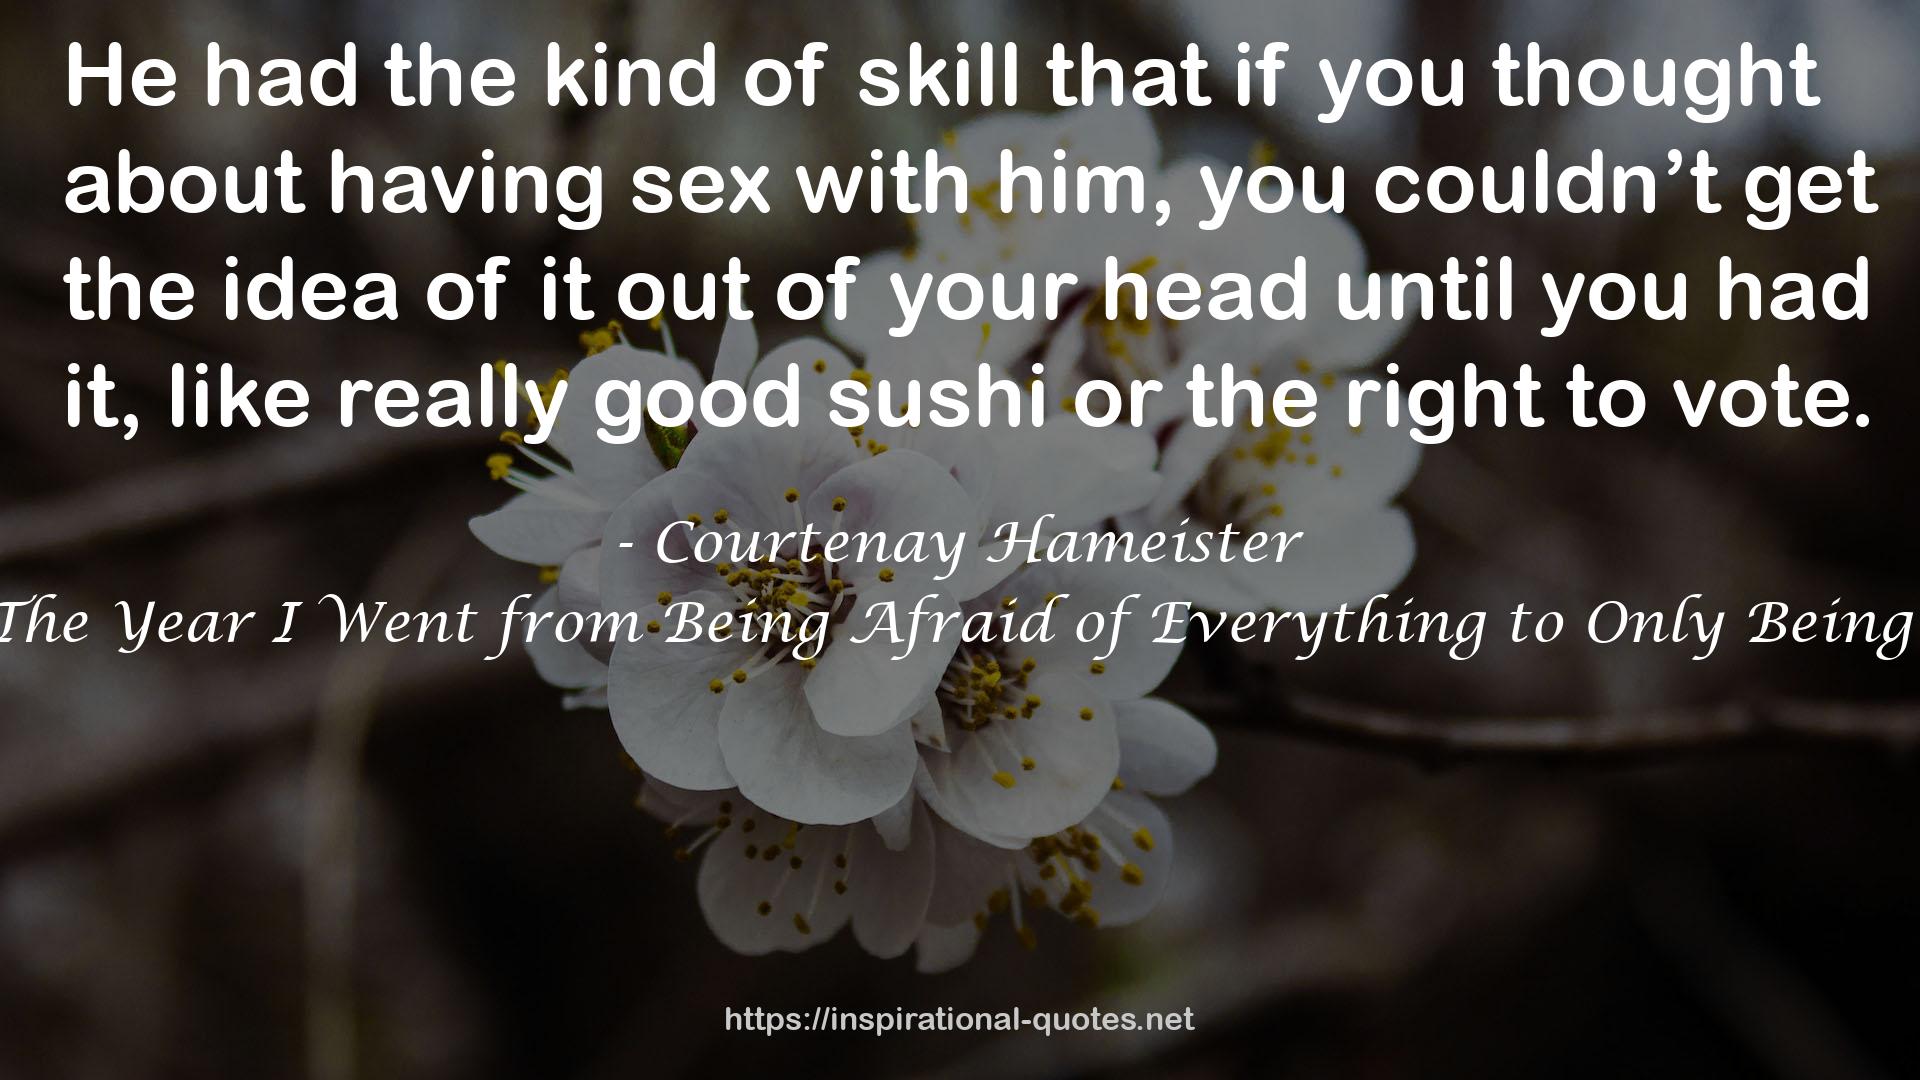 Courtenay Hameister QUOTES